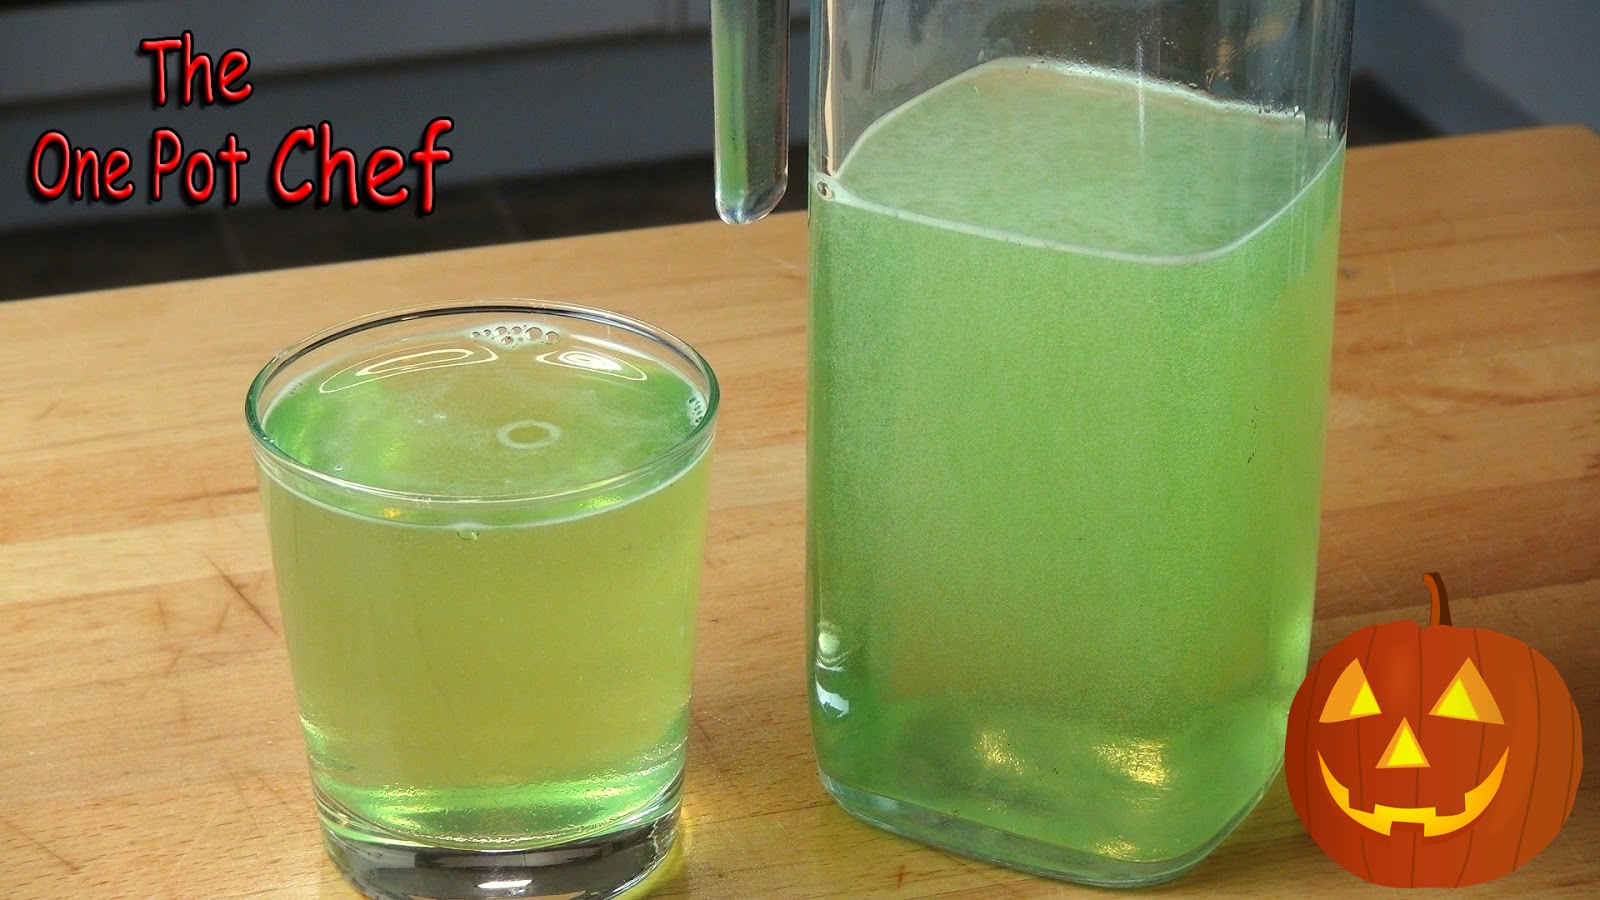 The One Pot Chef Show: Drinkable Slime - HALLOWEEN RECIPE